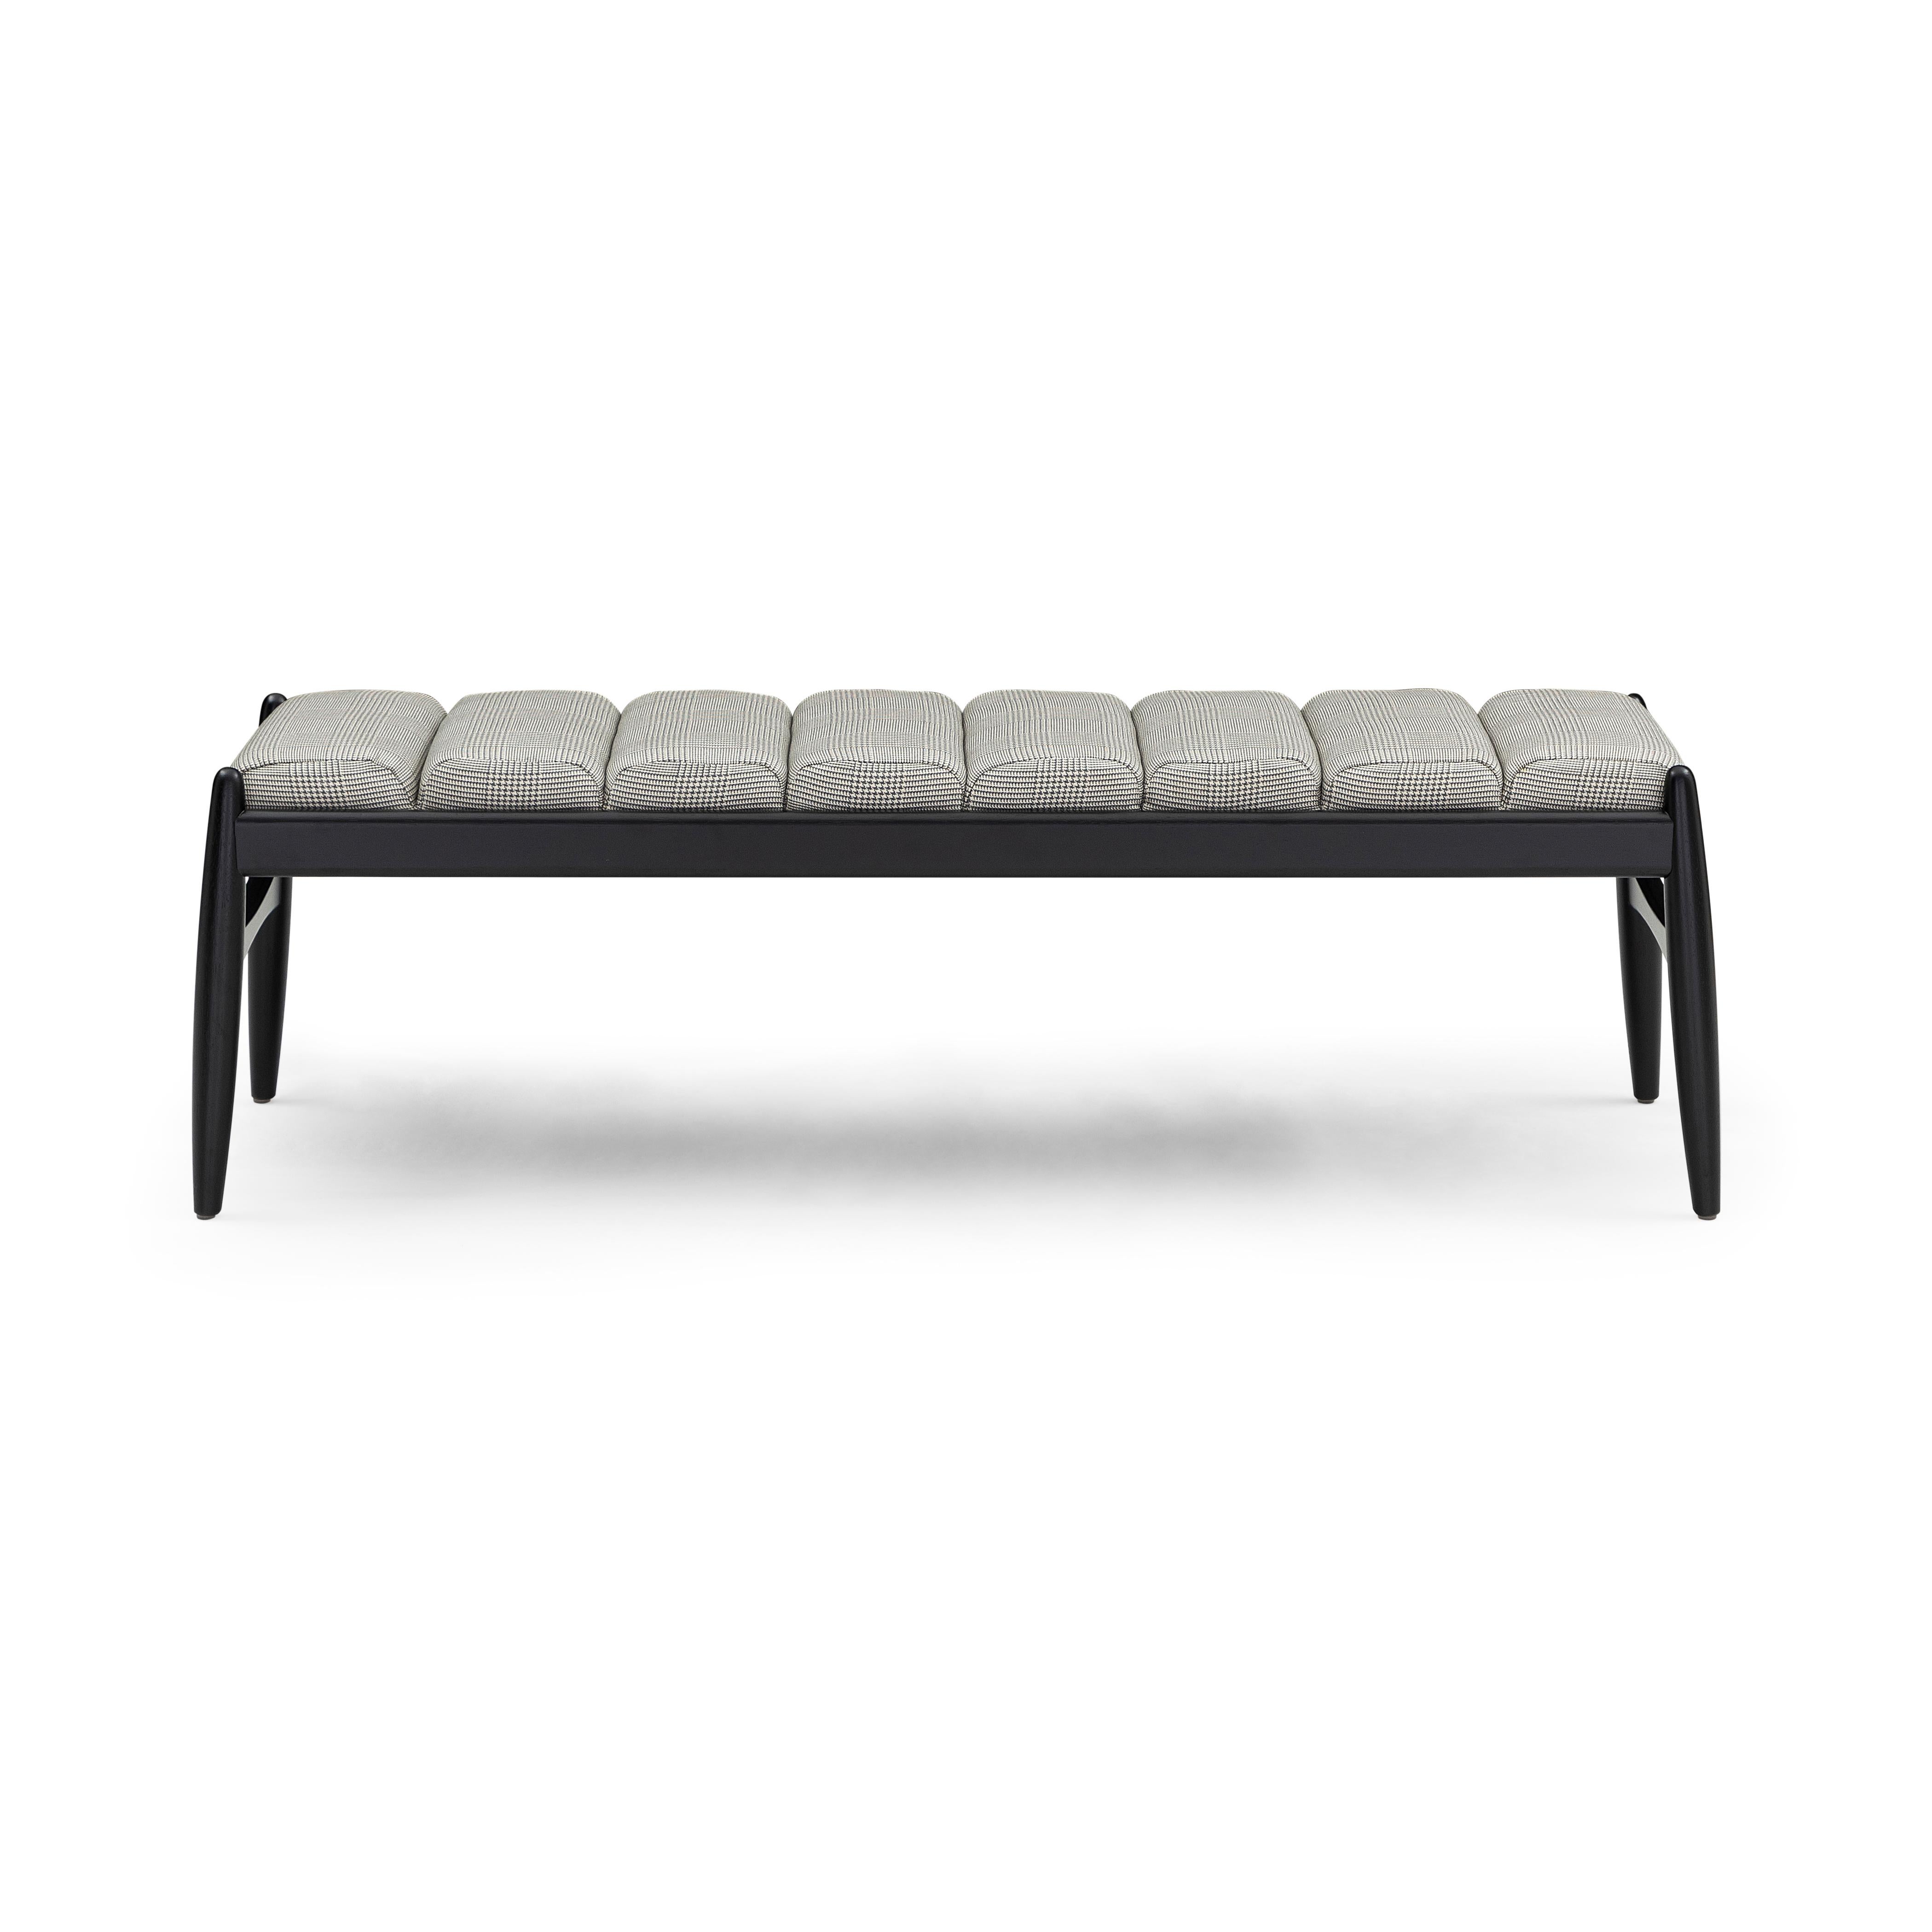 Wave Bench in Black Wood Finish and Plaid Fabric For Sale 1